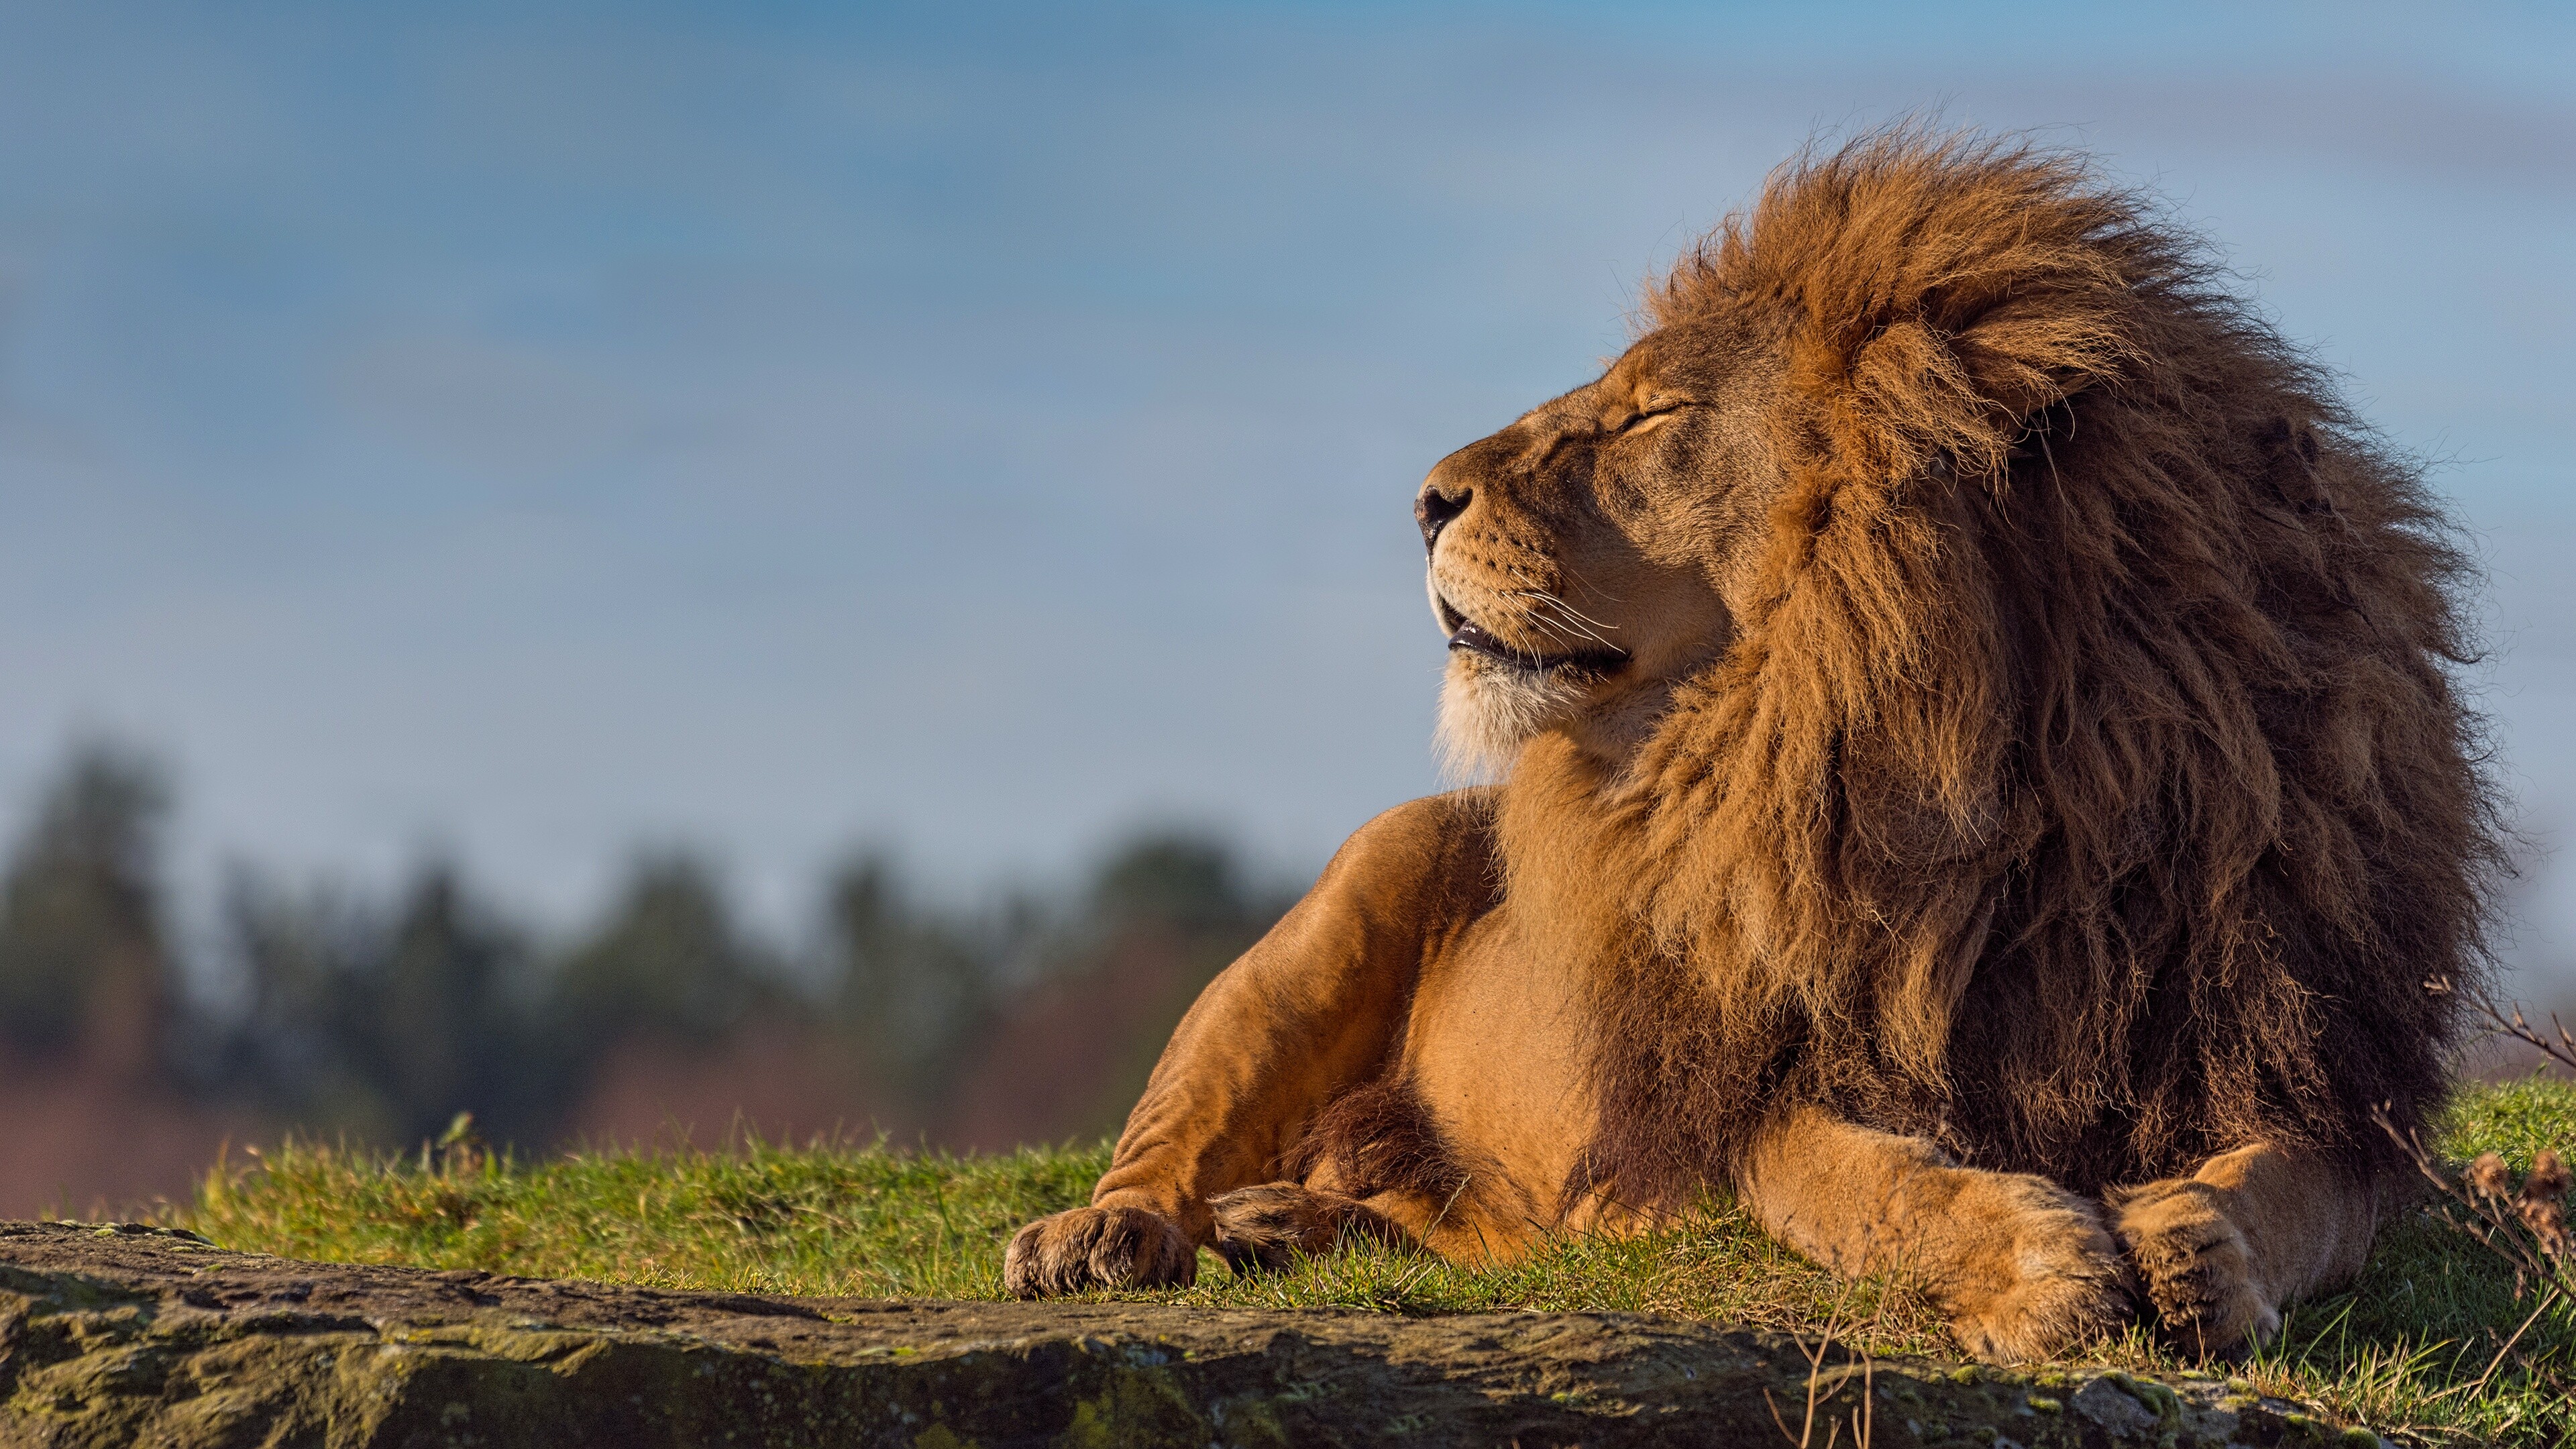 Lion: Lions have been kept in menageries since the time of the Roman Empire and have been a key species sought for exhibition in zoological gardens across the world since the late 18th century. 3840x2160 4K Background.